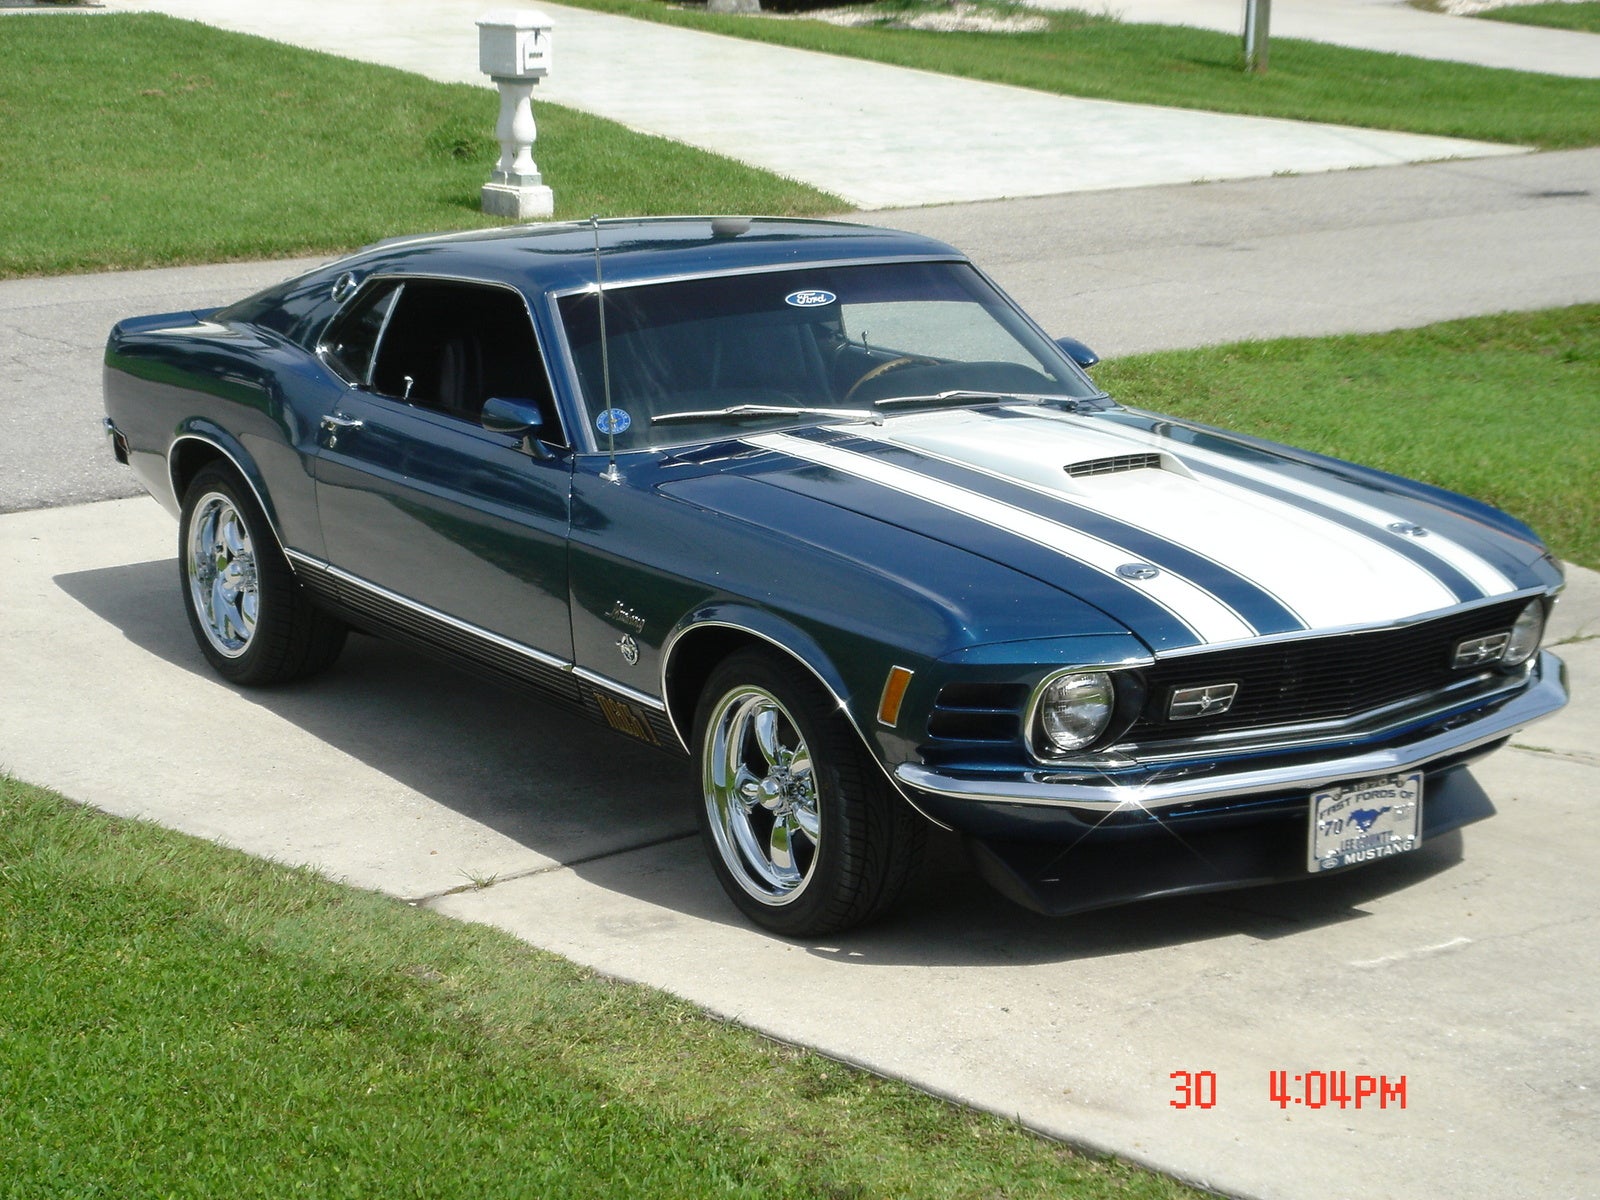 Ford Mustang 1970 Mach 1